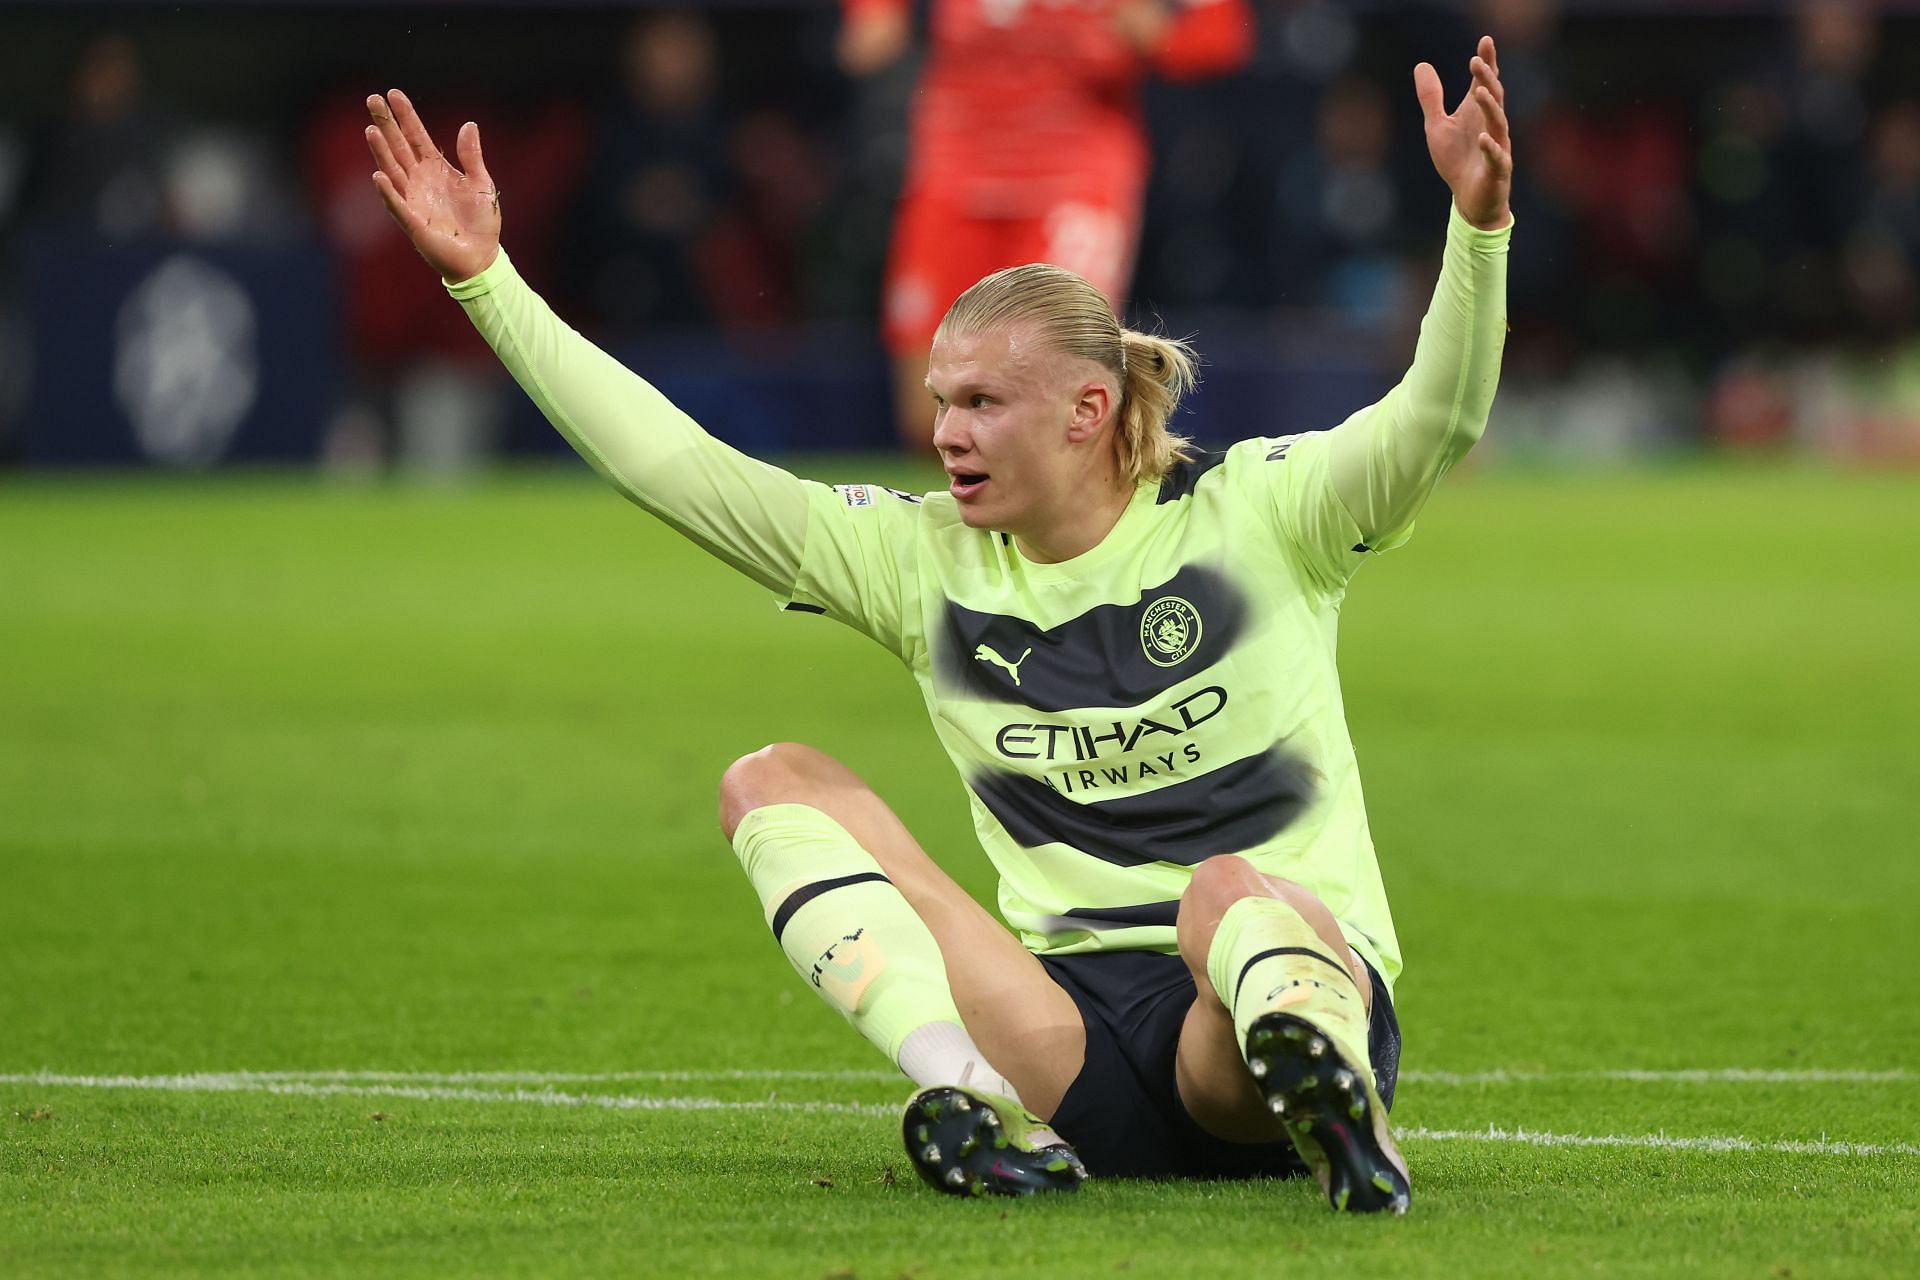 Real Madrid trio set to start to stop the in-form Erling Haaland.